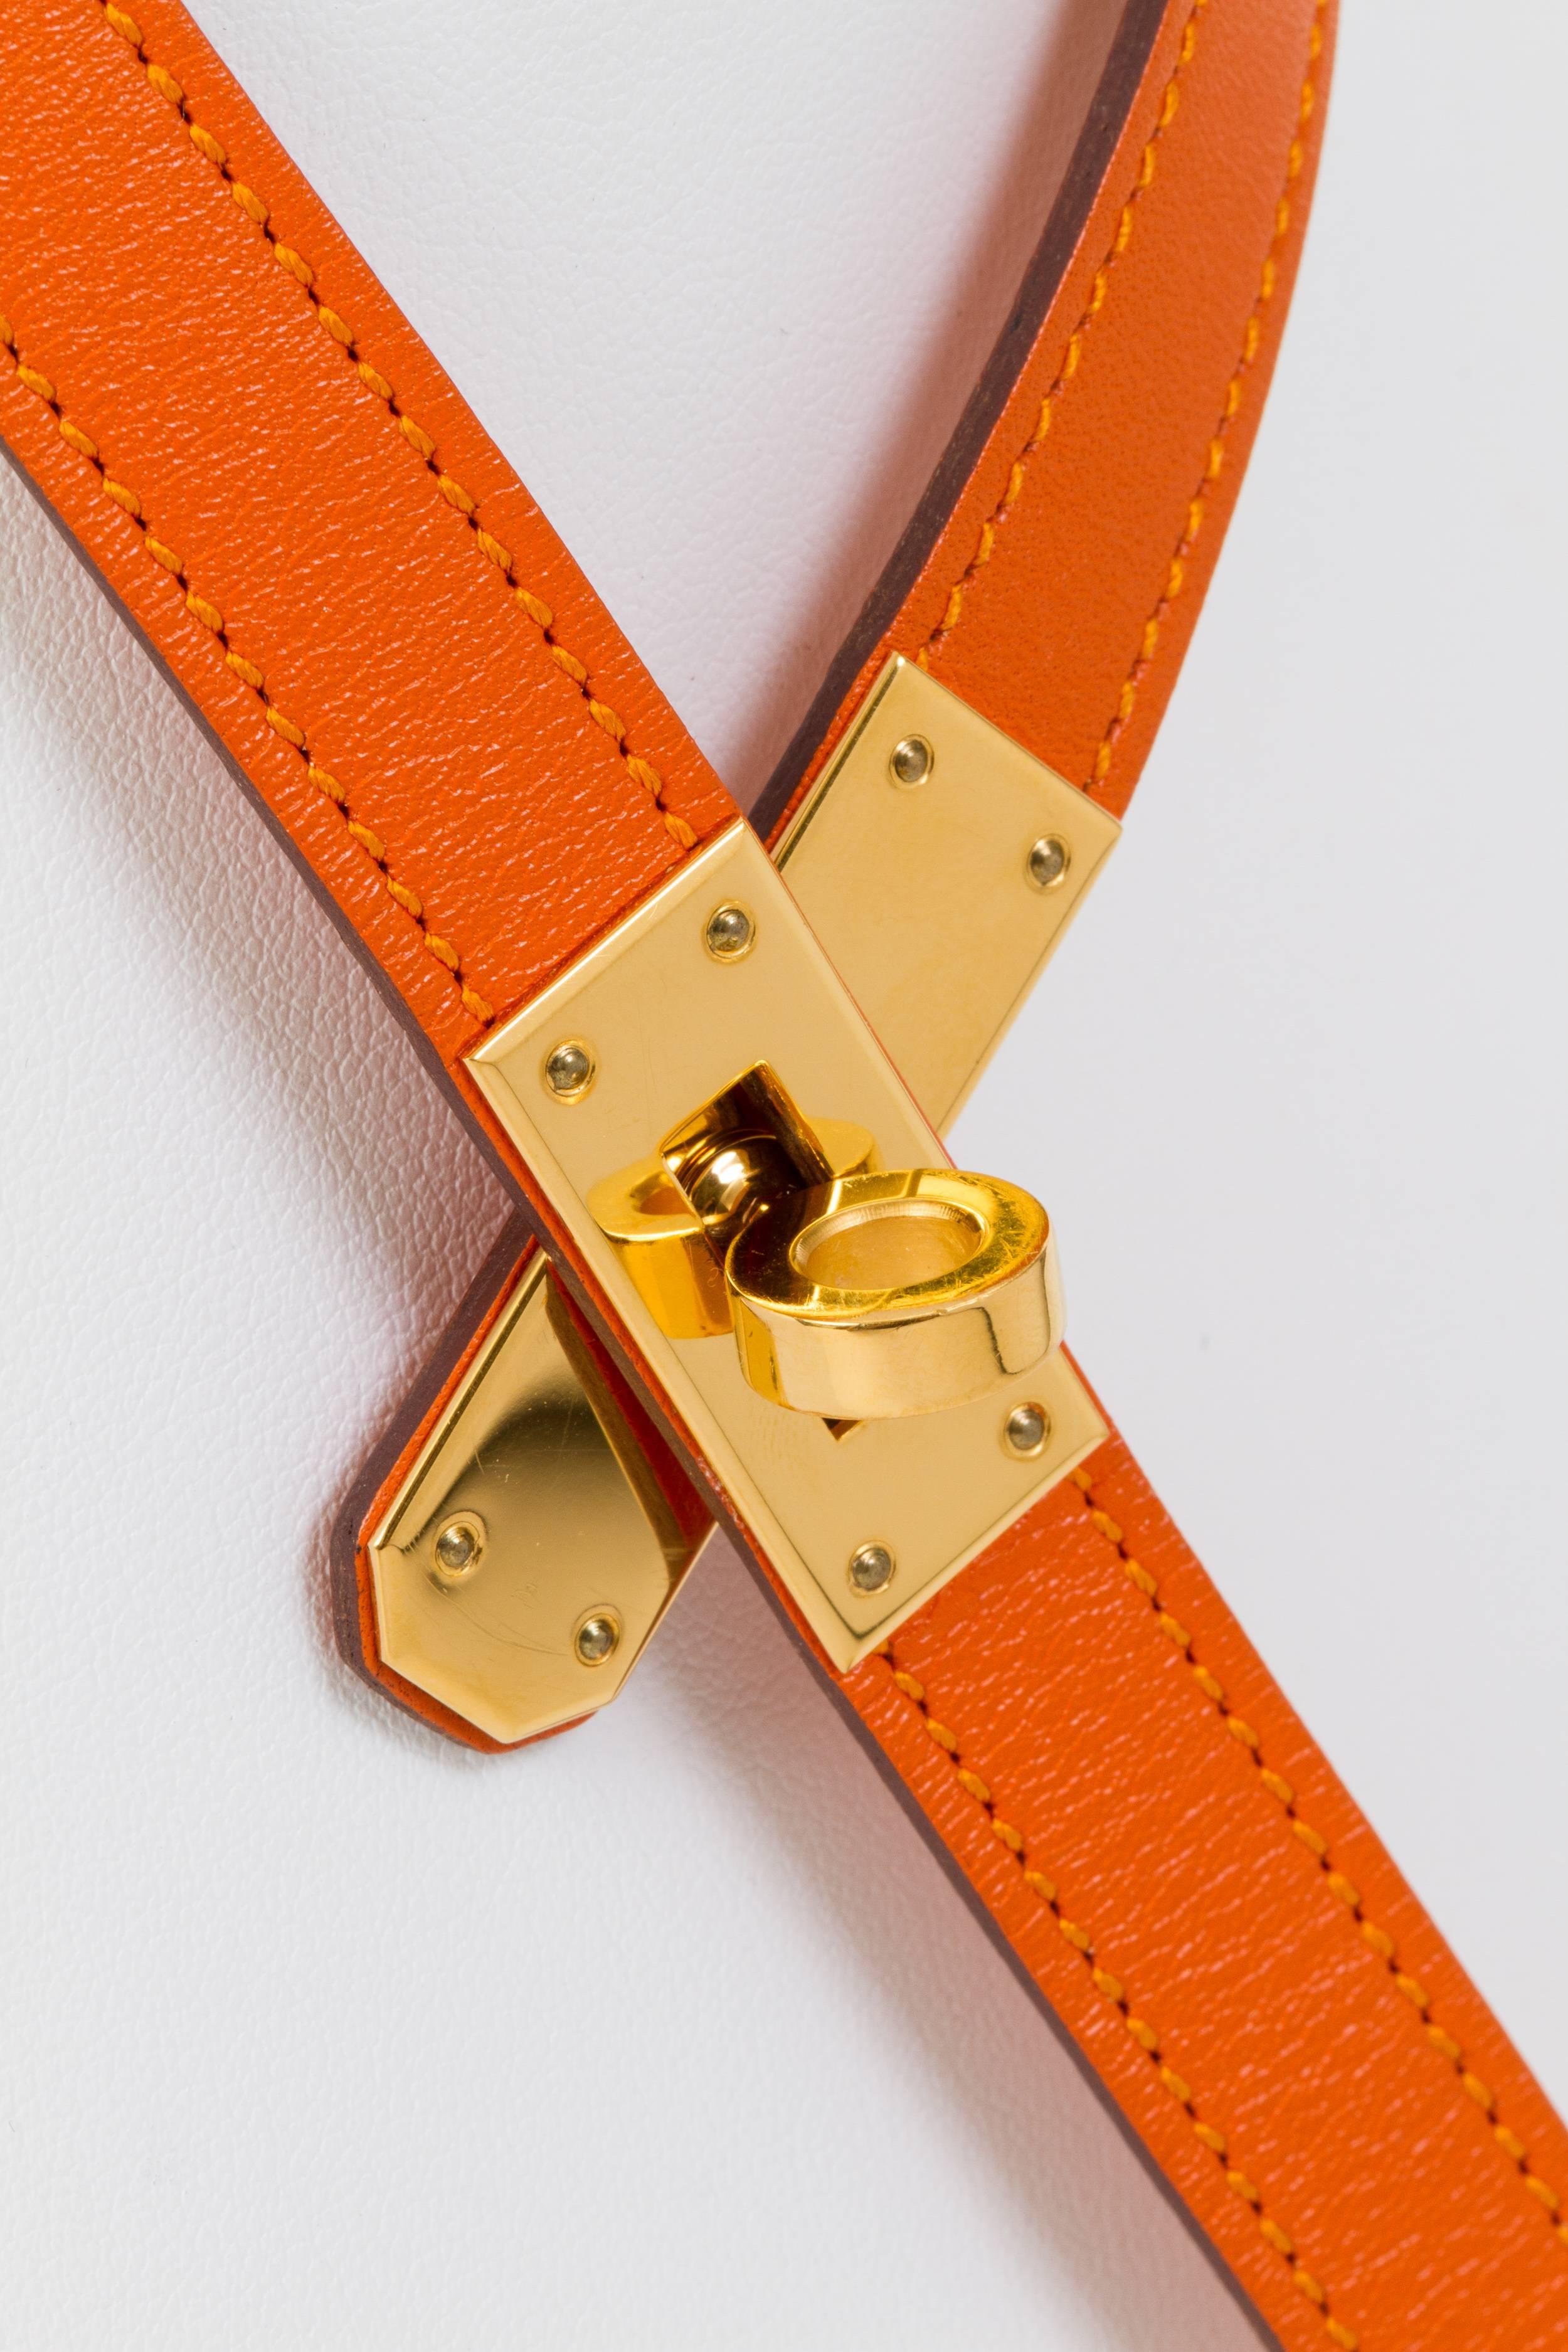 Hermès Kelly necklace in orange swift leather and goldtone hardware. Dated 